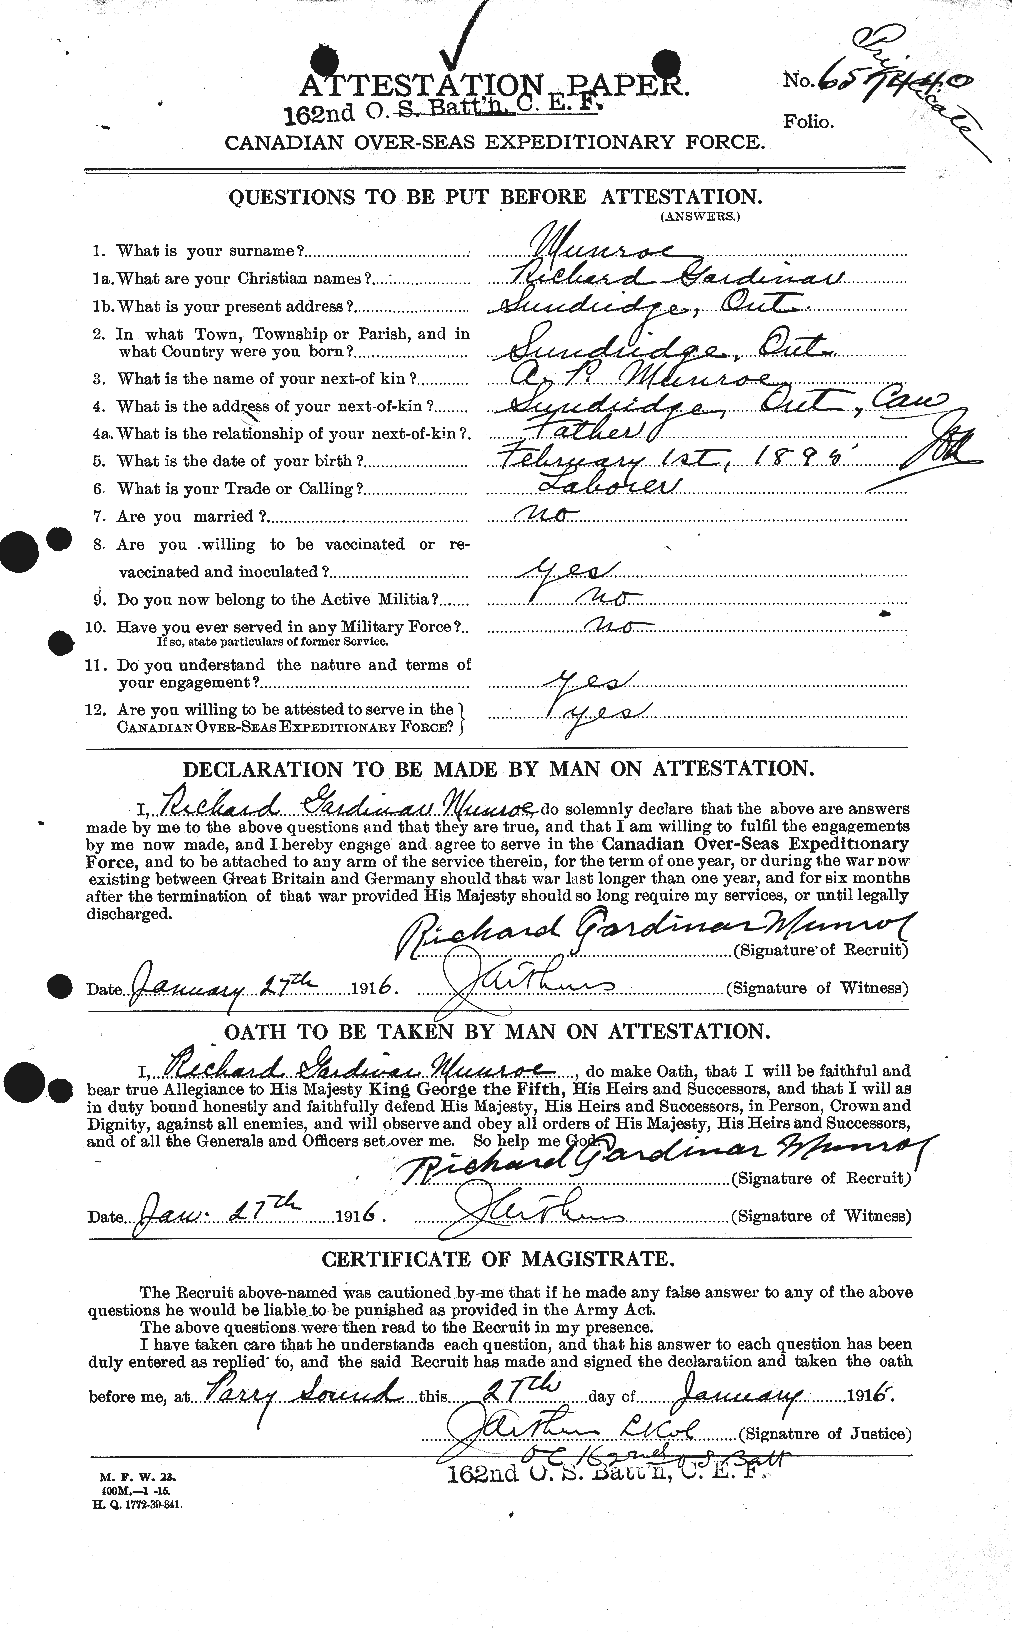 Personnel Records of the First World War - CEF 515574a